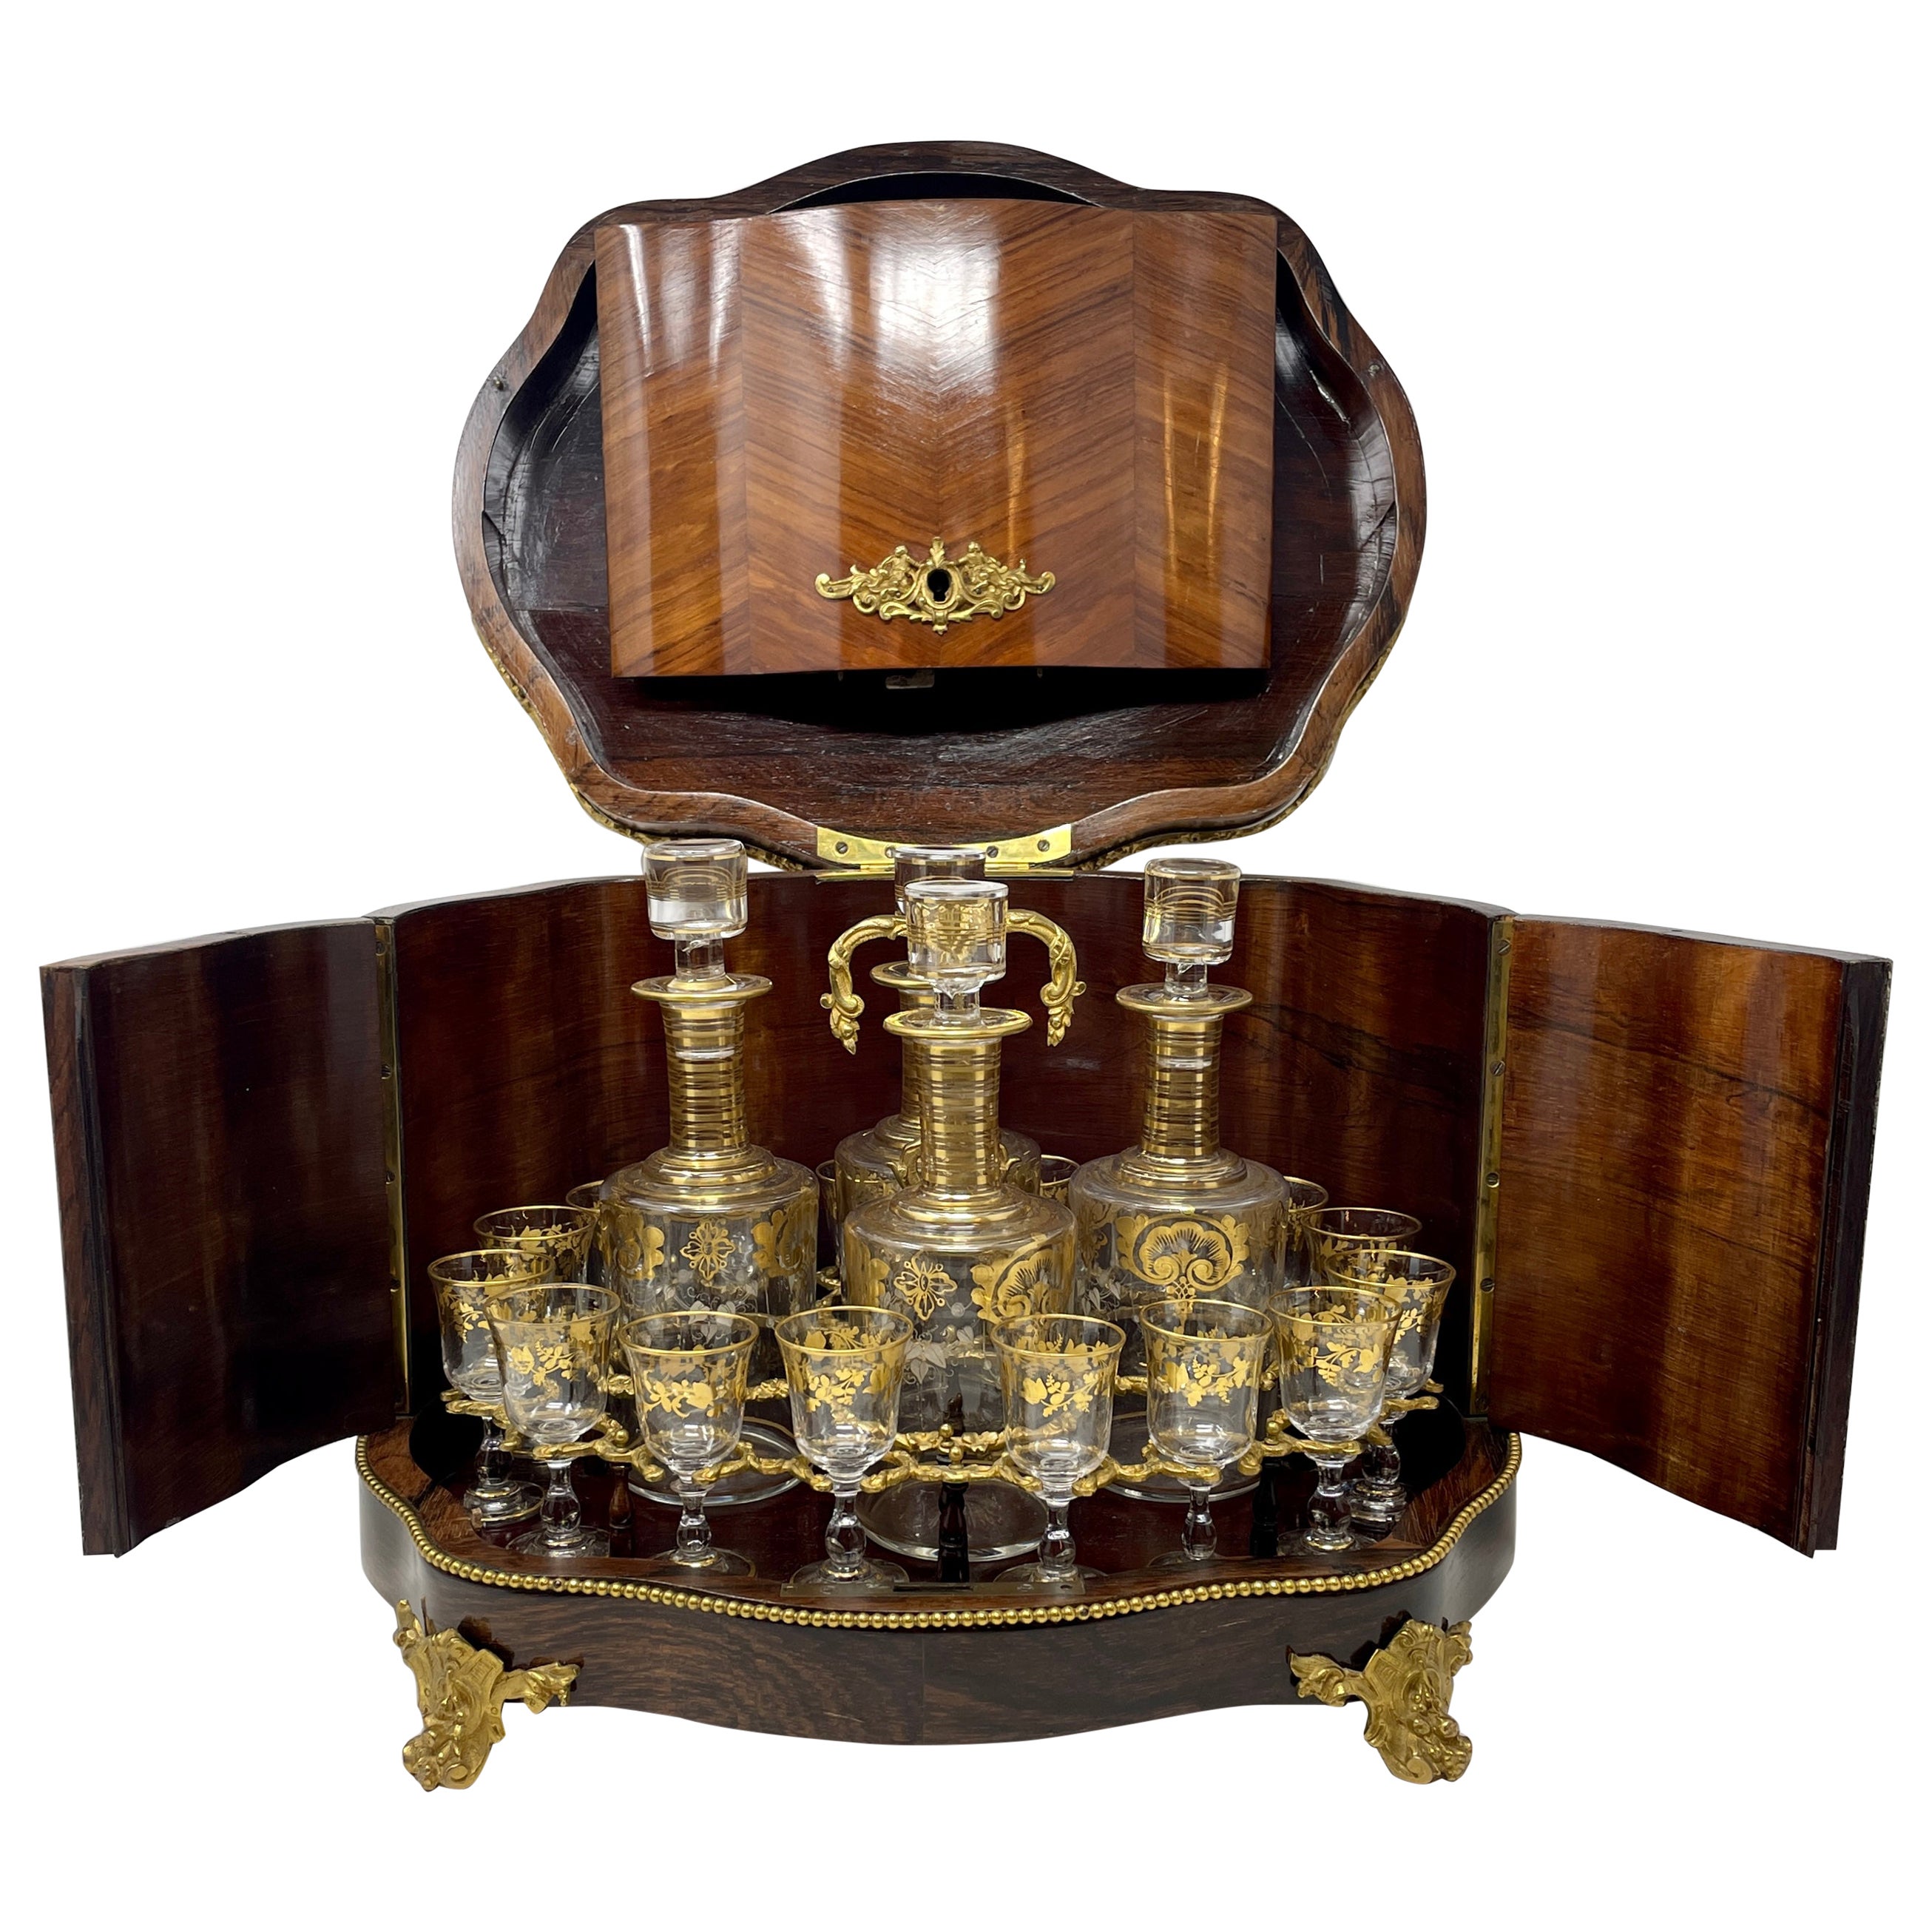 Antique French Baccarat Crystal Cave À Liqueur in Satinwood Case circa 1885-1890 For Sale